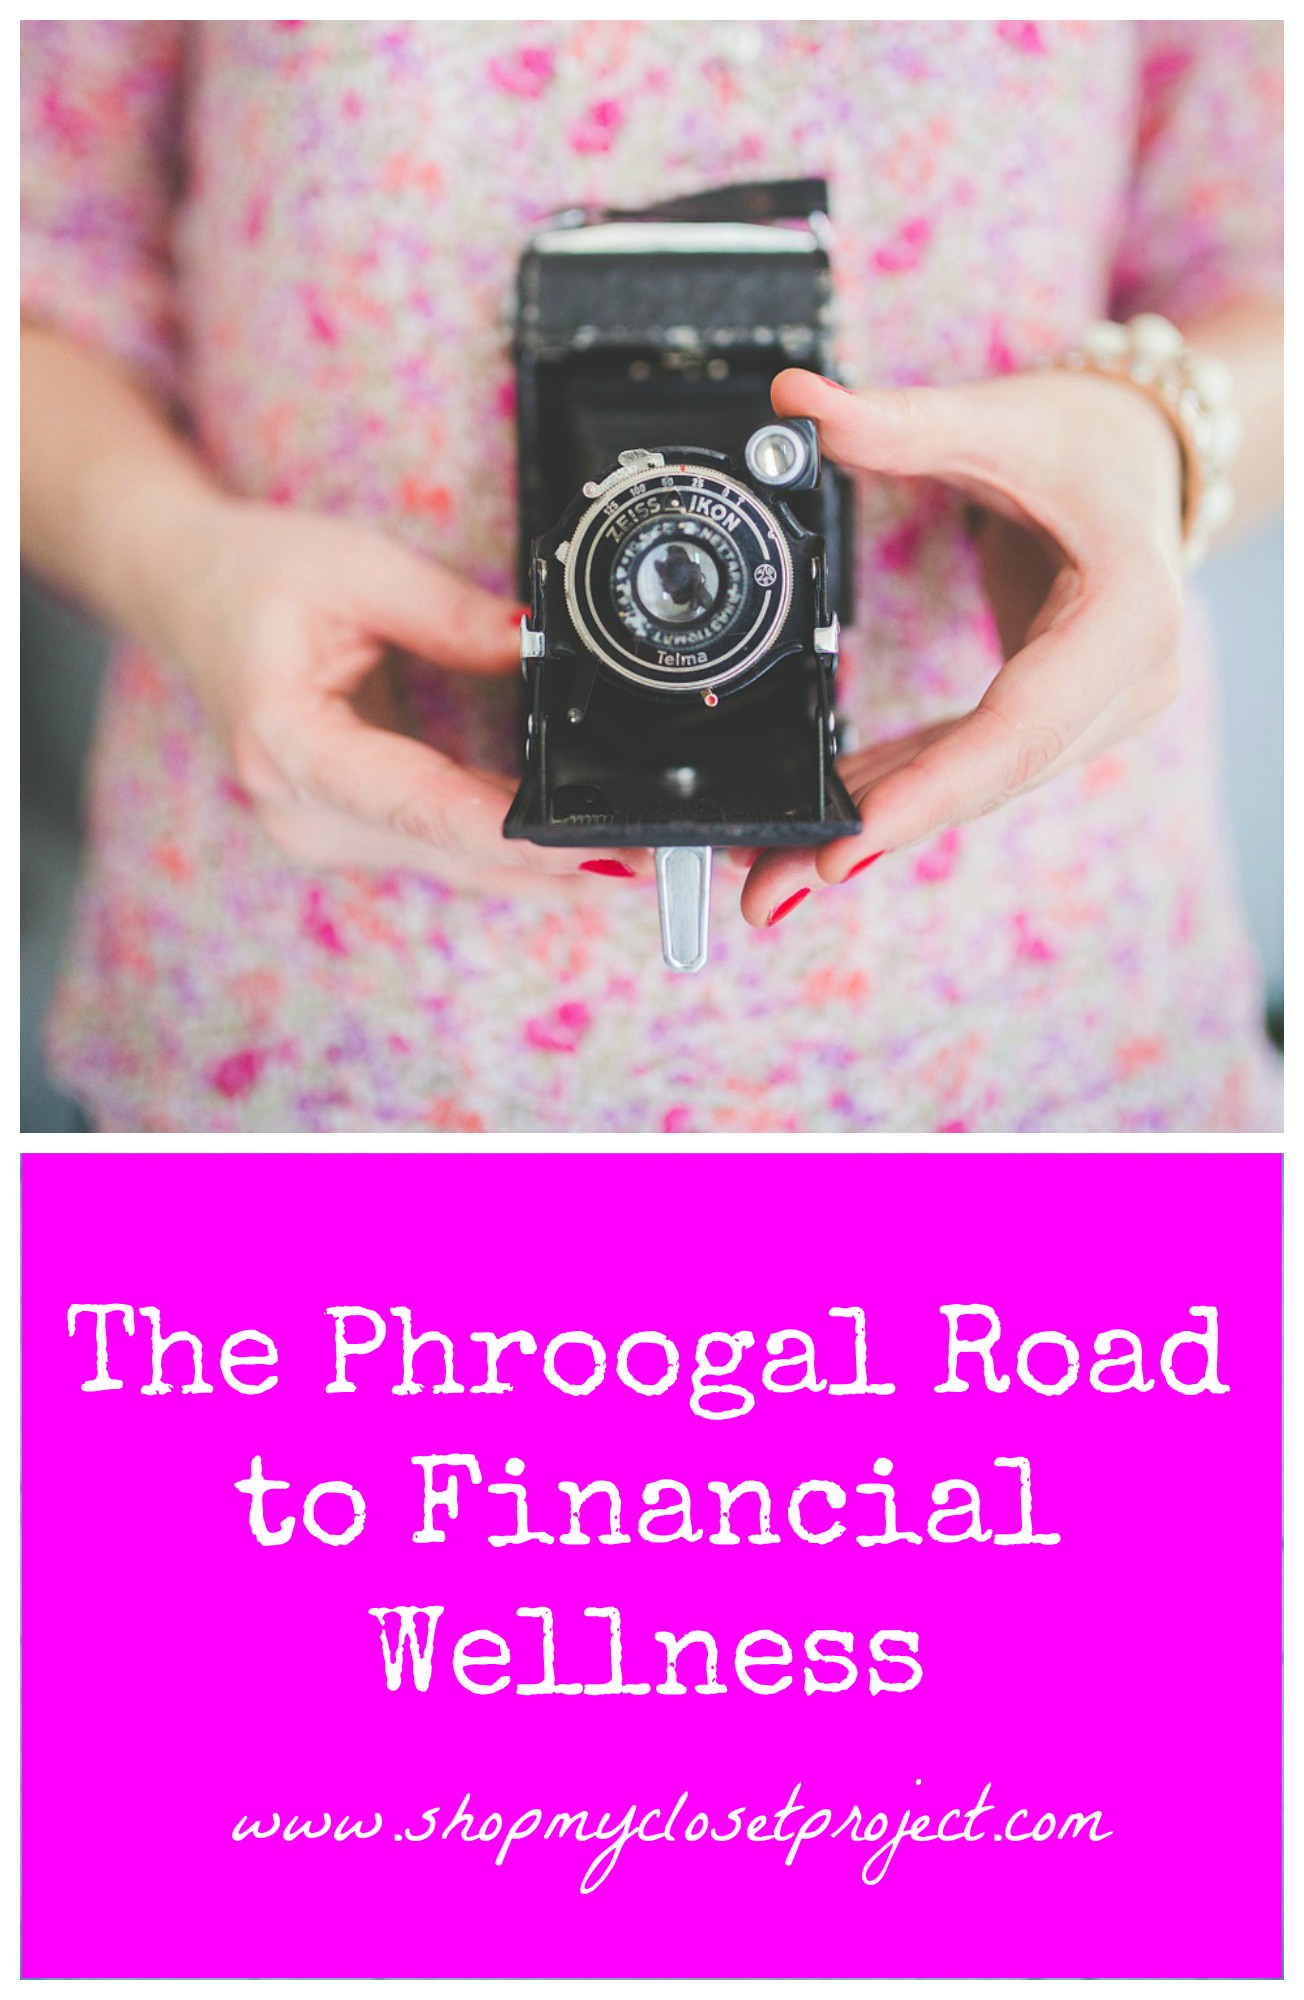 The Phroogal Road to Financial Wellness